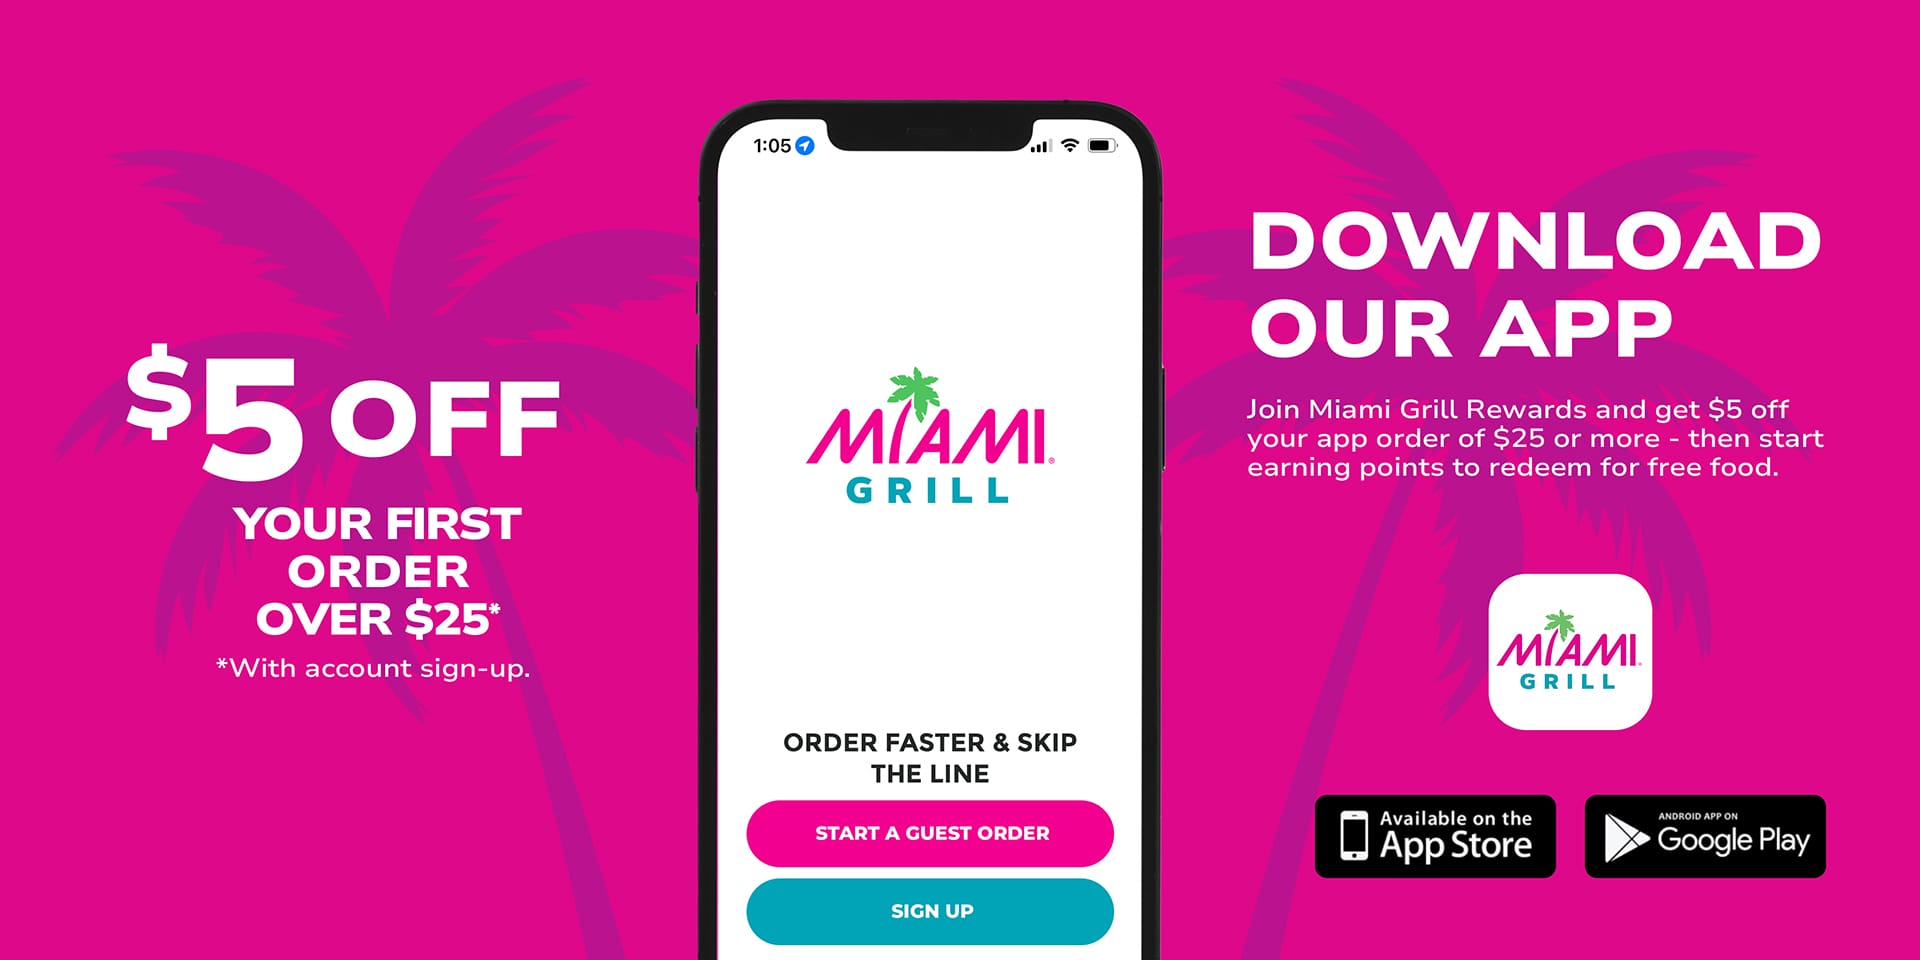 Download our app - $5 off your first order over $25. Easy ordering and line skipping!